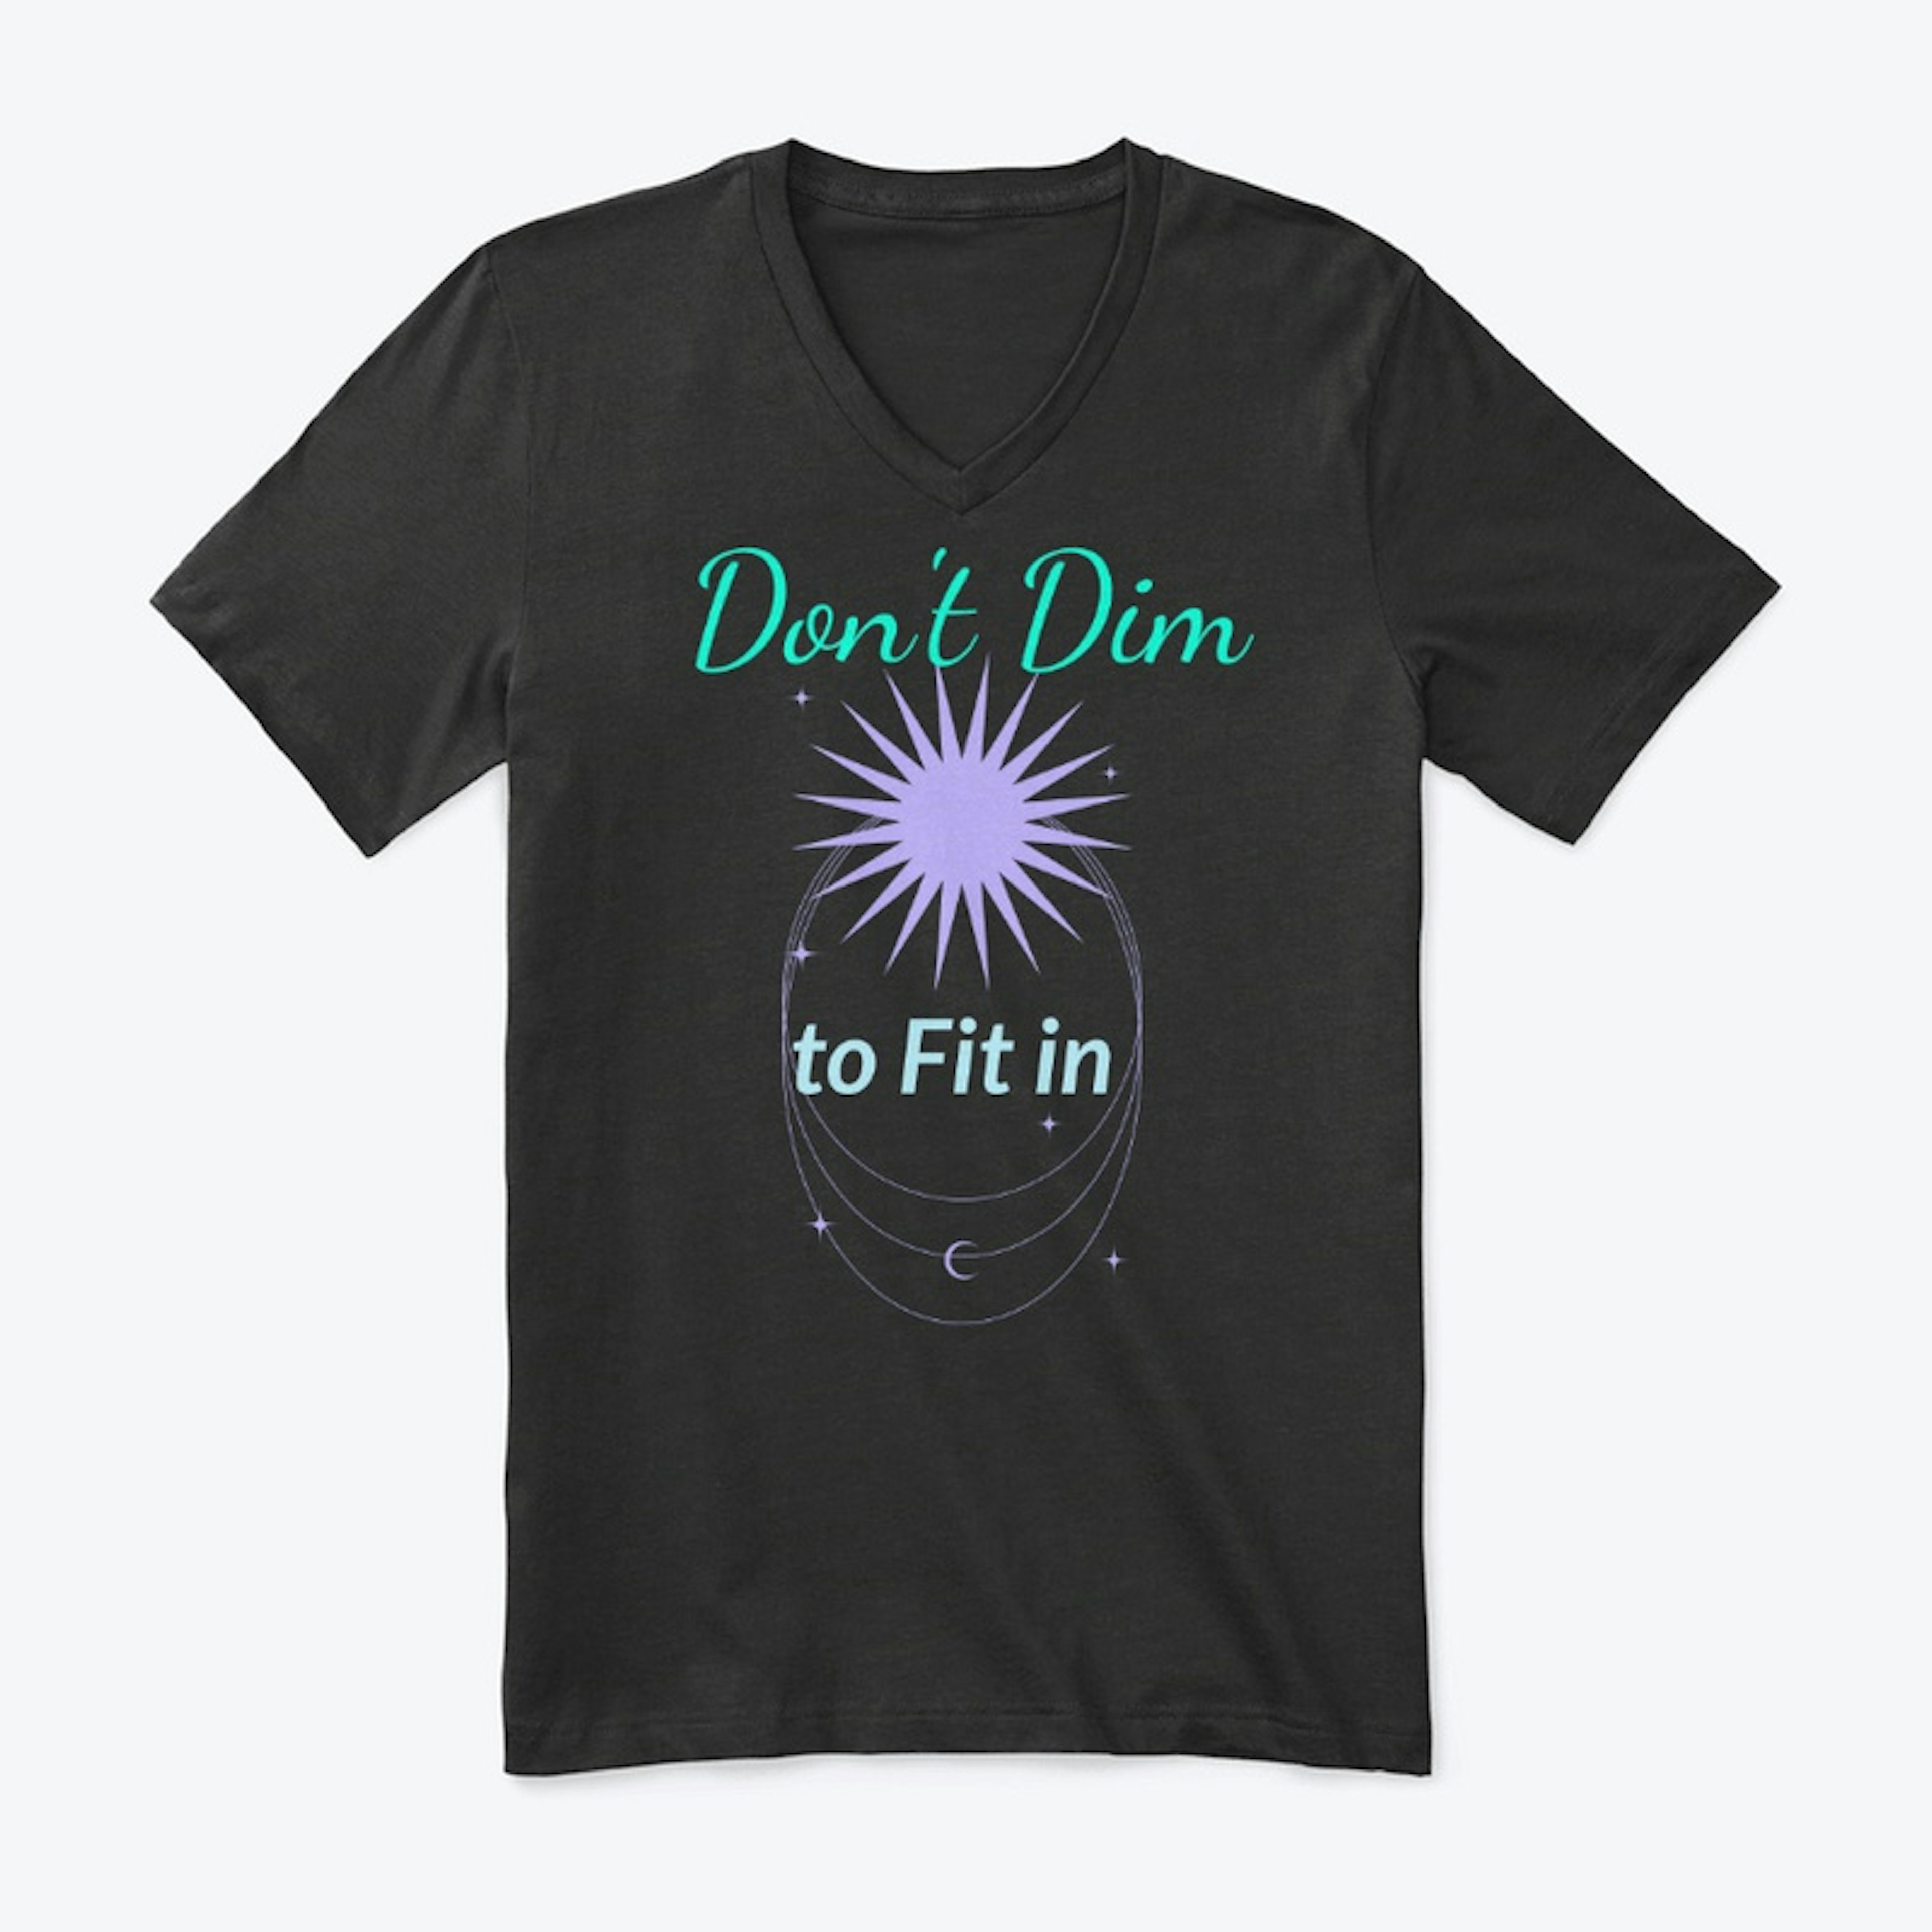 "Don't Dim to Fit in"